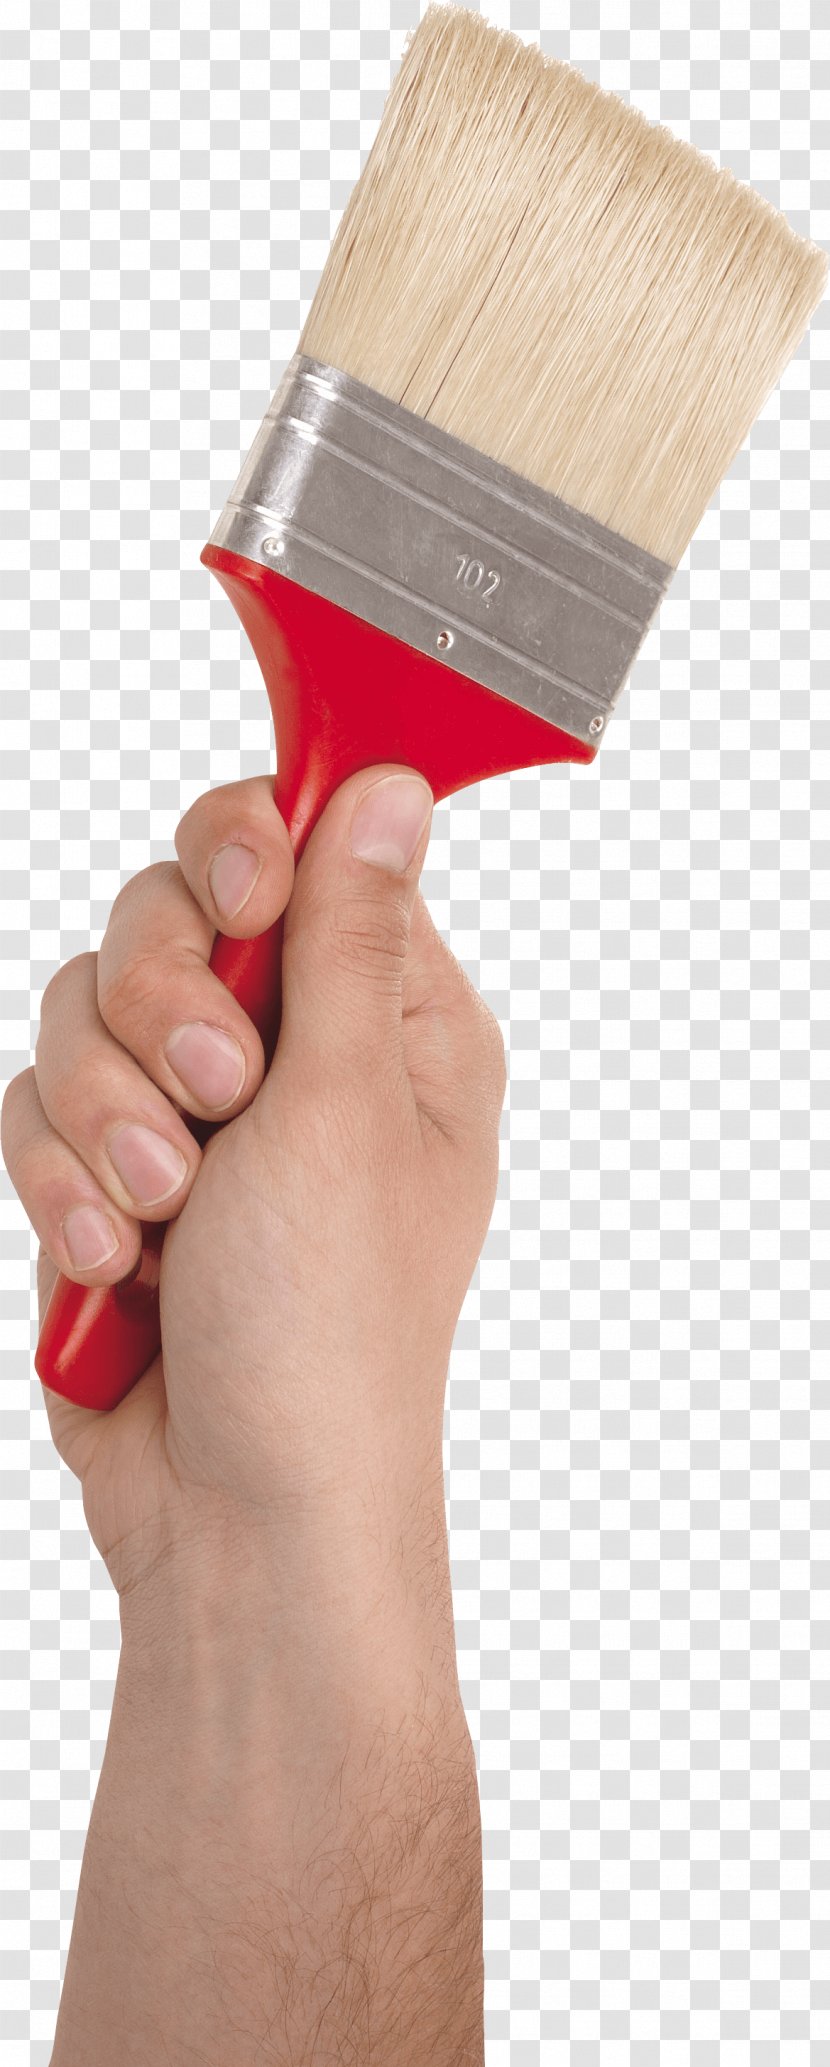 Paint Brush In Hand Image - Paintbrush Transparent PNG